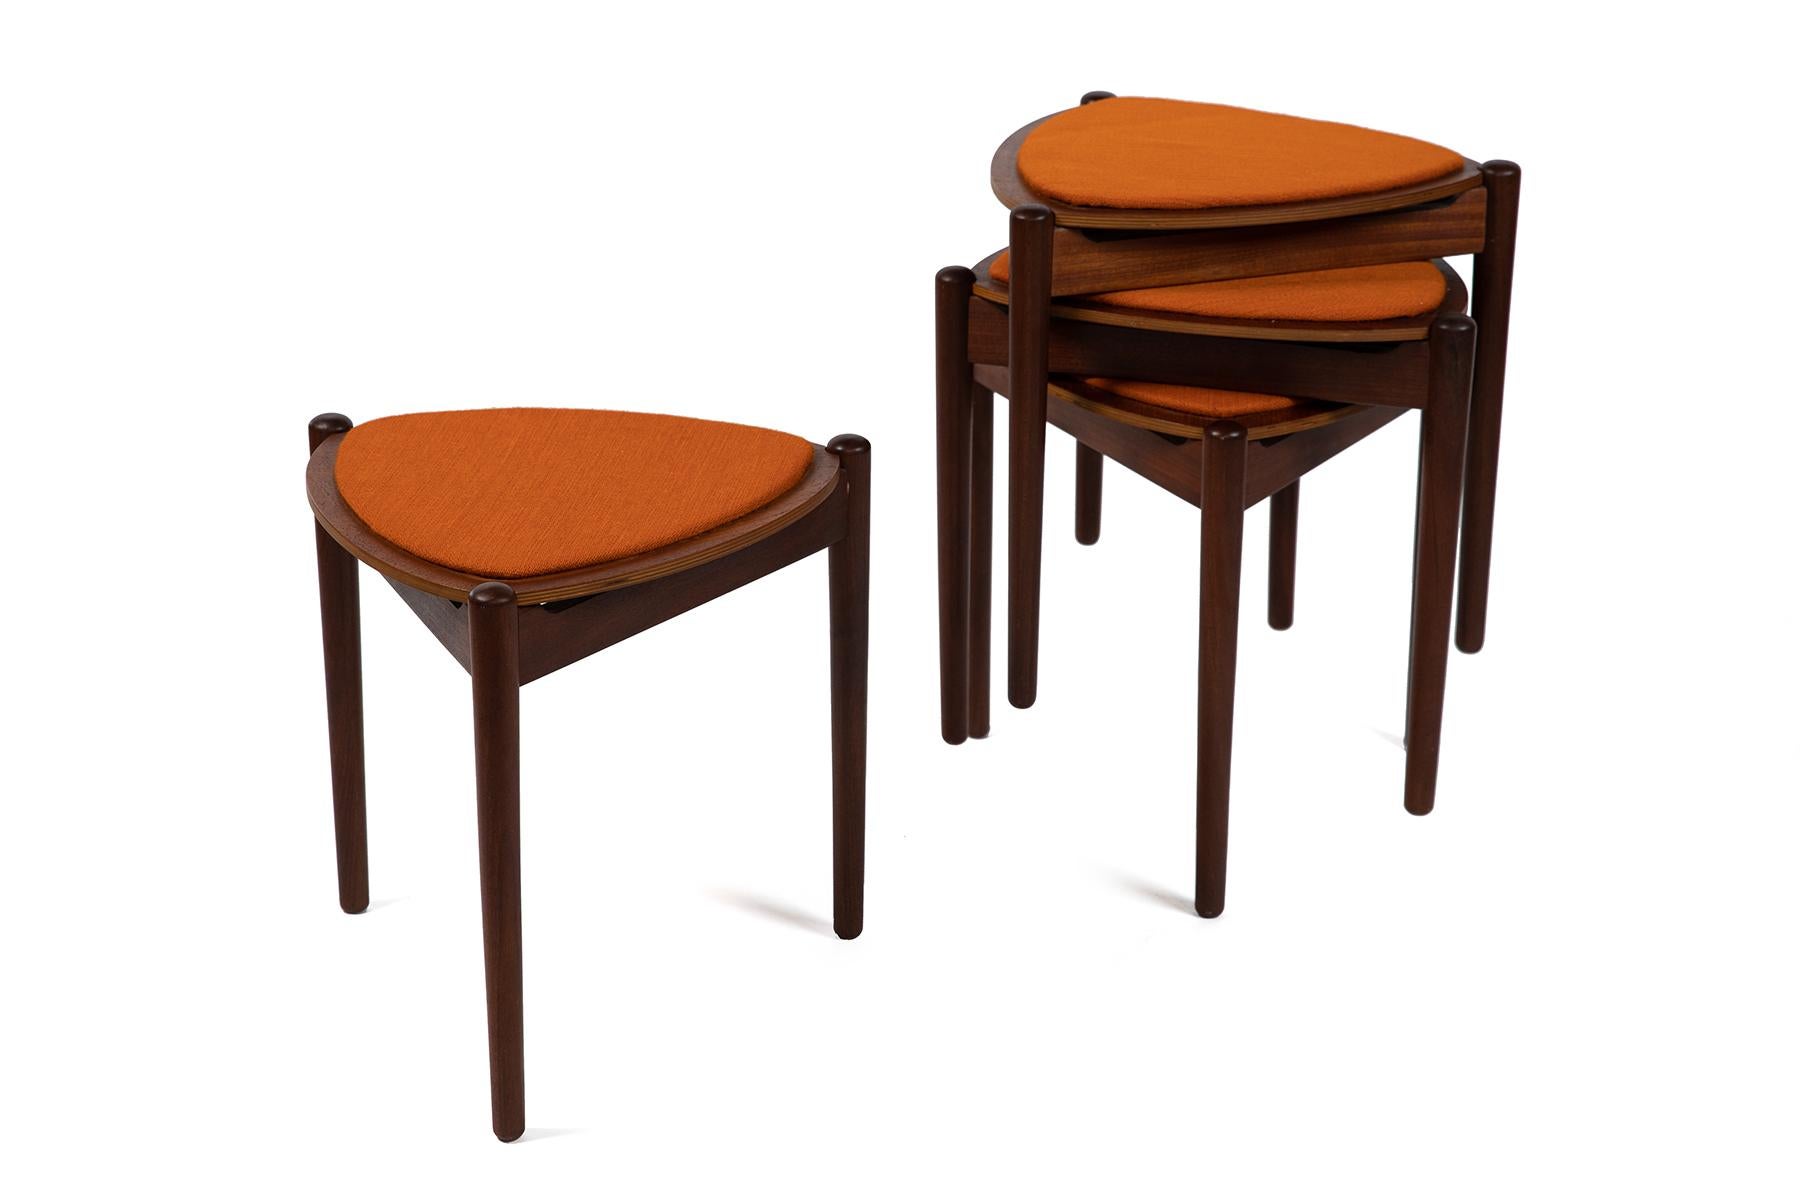 Hans Olsen for Bramin stools or tables circa early 1960's. These all original examples retain their striking orange upholstery and finish. They can be stacked and the tops are reversible. Price listed is for the set of four.